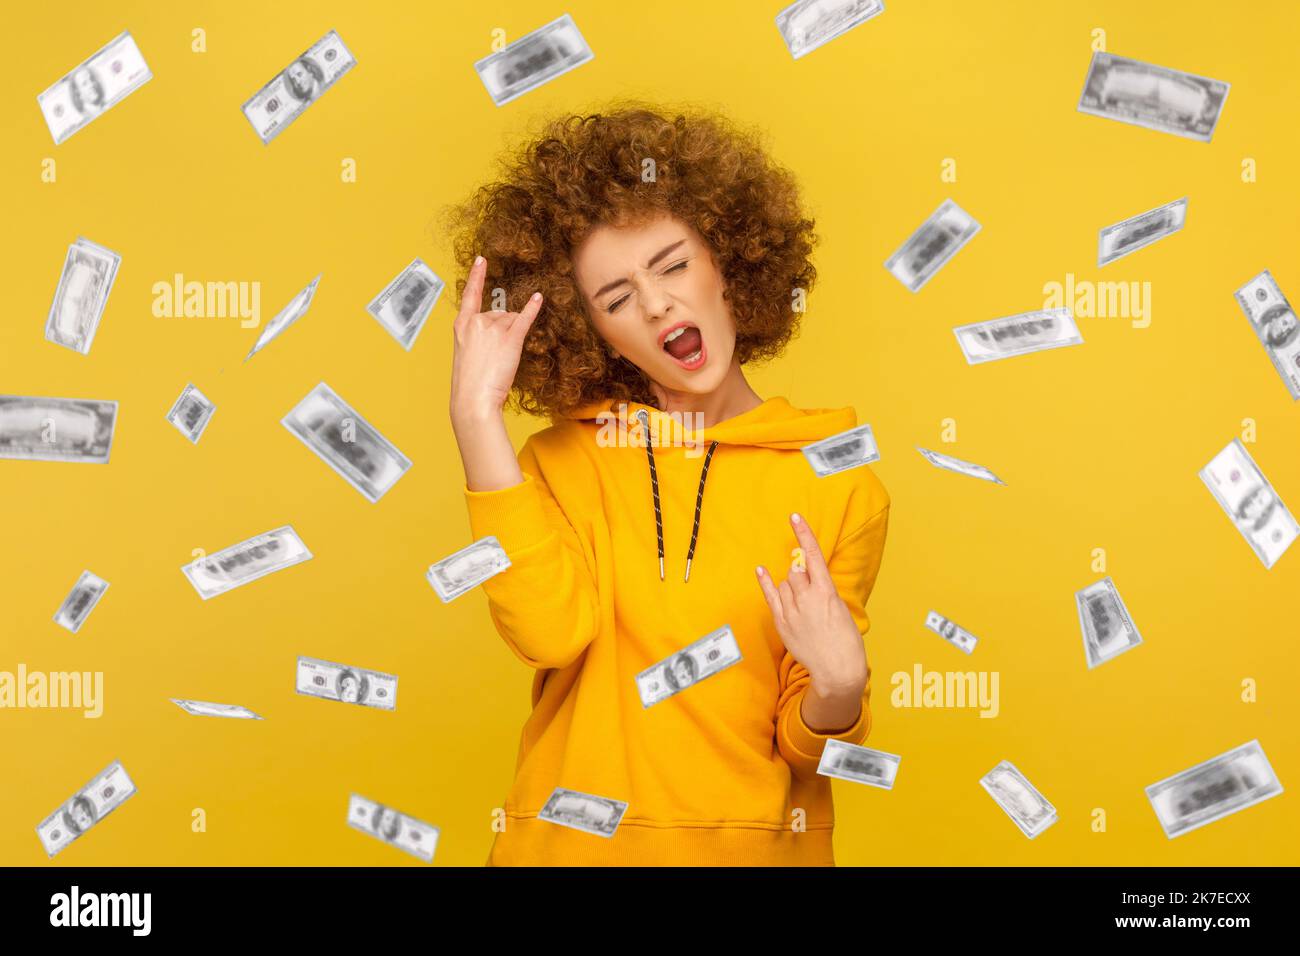 Portrait of woman with Afro hairstyle wearing casual style hoodie showing rock and roll, rejoicing money rain falling from up, winning lottery. Indoor studio shot isolated on yellow background. Stock Photo